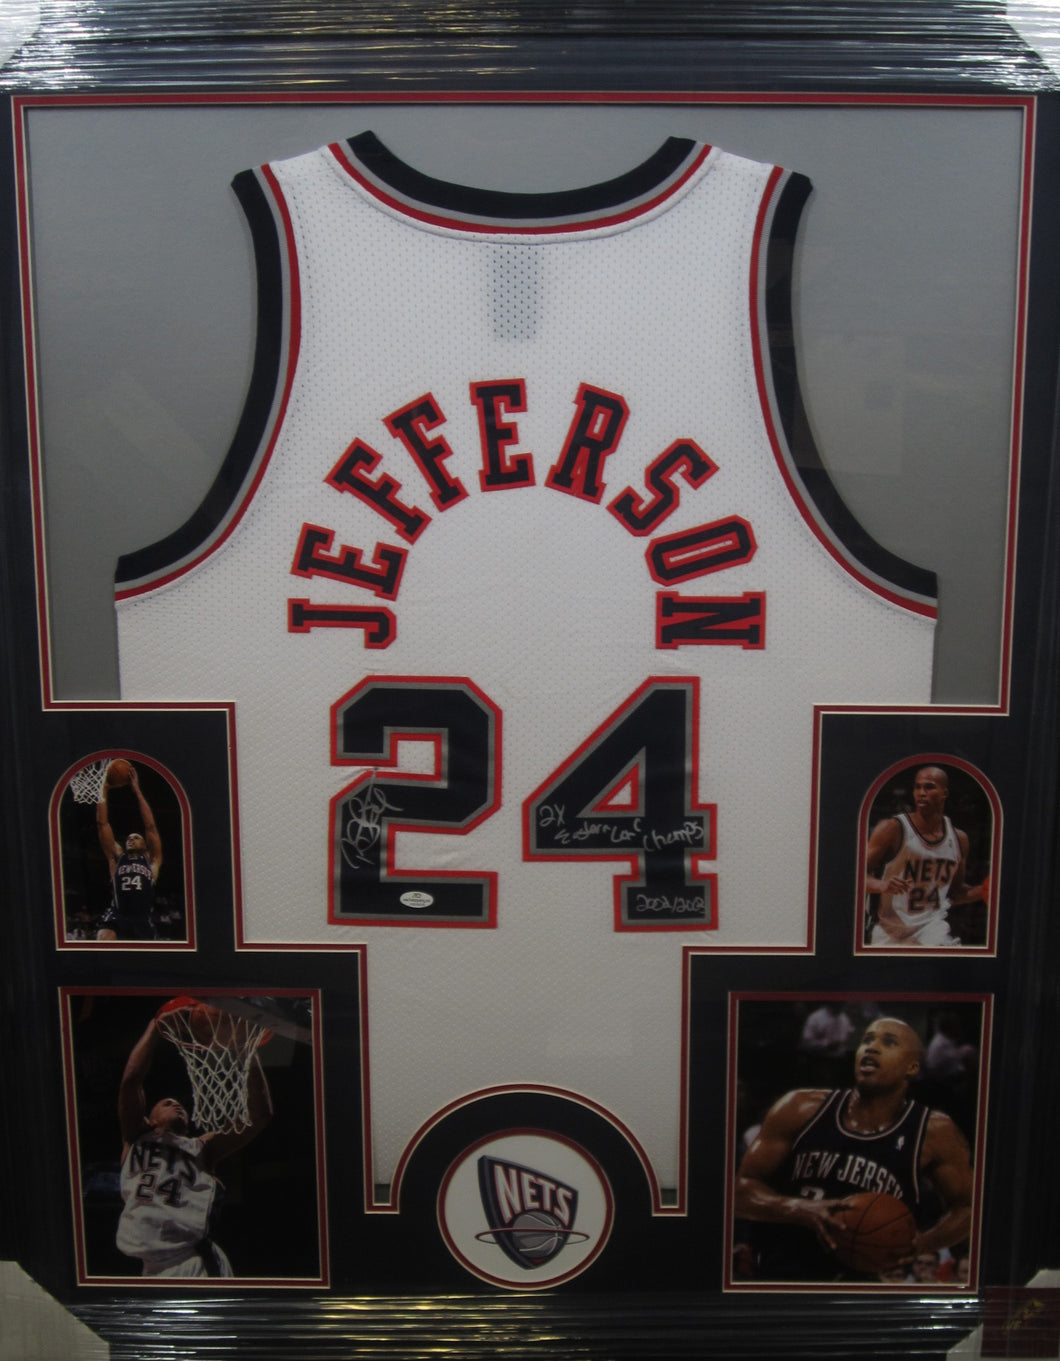 New Jersey Nets Richard Jefferson Signed Jersey with 2x Eastern Conf. Champs & 2002/2003 Inscriptions Framed & Matted with COA